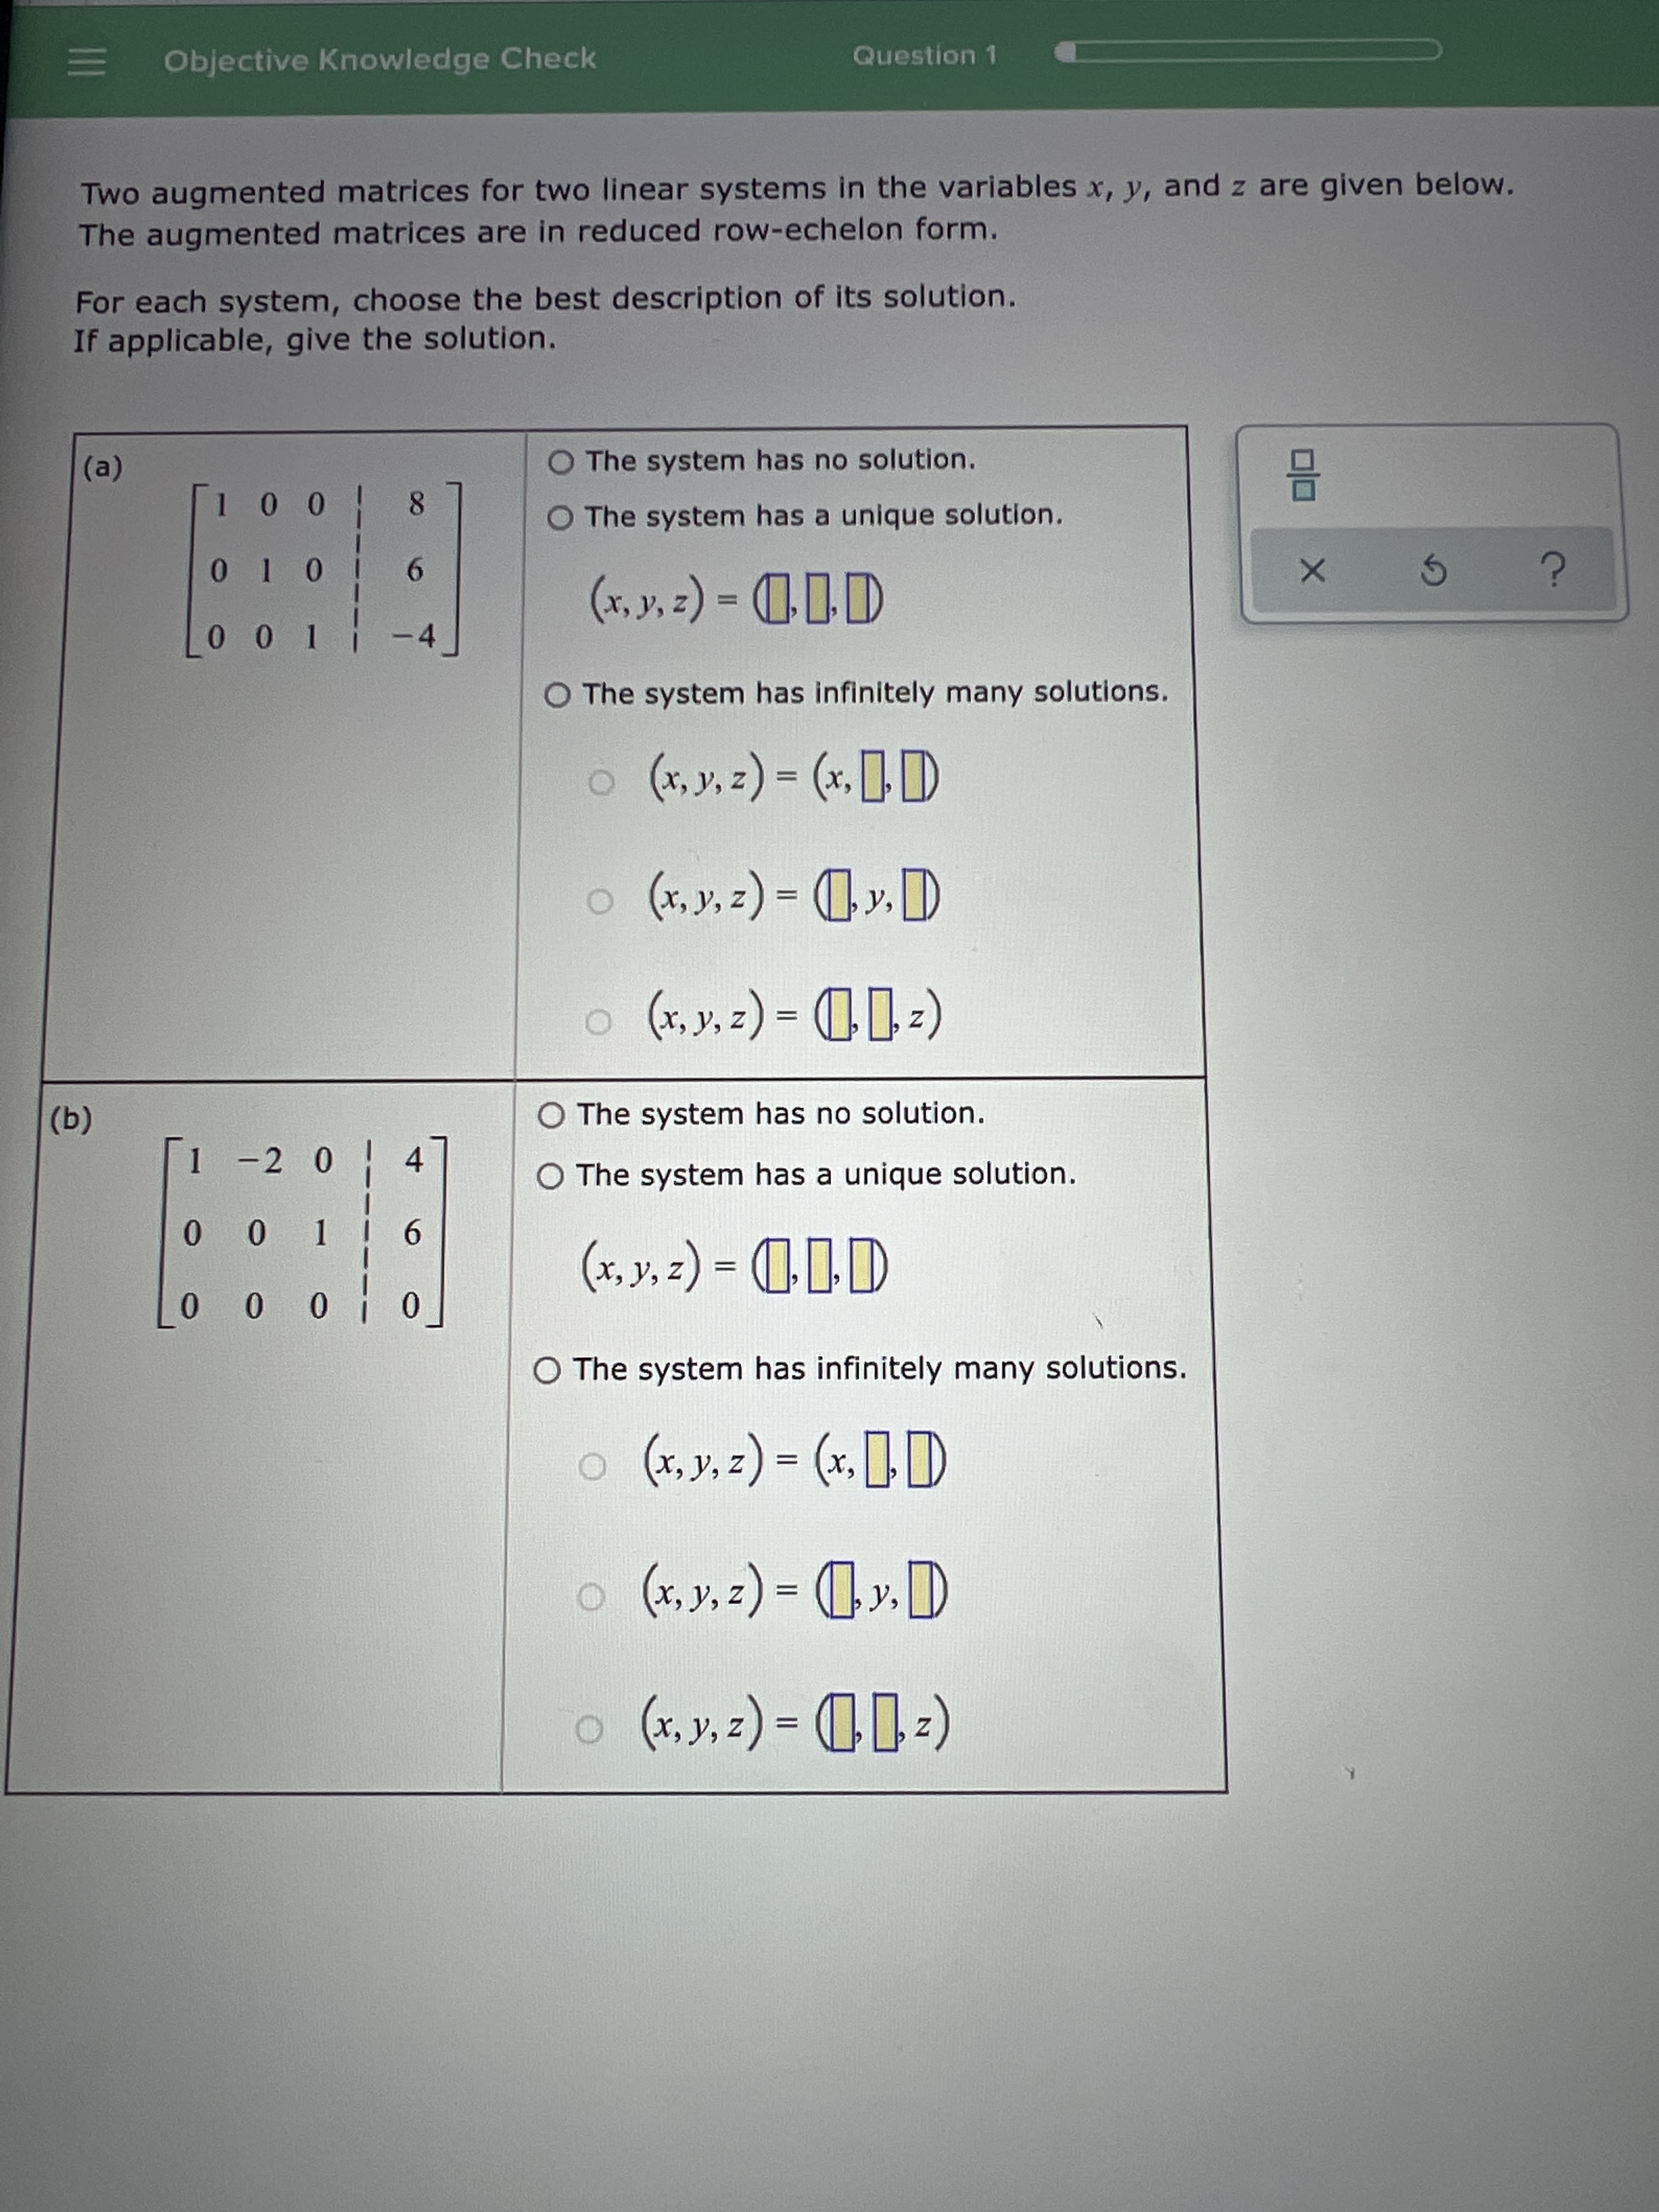 (@)
E Objective Knowledge Check
Question 1
Two augmented matrices for two linear systems in the variables x, y, and z are given below.
The augmented matrices are in reduced row-echelon form.
For each system, choose the best description of its solution.
If applicable, give the solution.
O The system has no solution.
O The system has a unique solution.
0 0 0
9.
II
I0 0
O The system has infinitely many solutions.
11*) = ( * *x) O
O The system has no solution.
(a)
1 -2 0 4
O The system has a unique solution.
11D-(-*)
O The system has infinitely many solutions.
9 * ** 0
%3D
0 0 0 0
%3D
